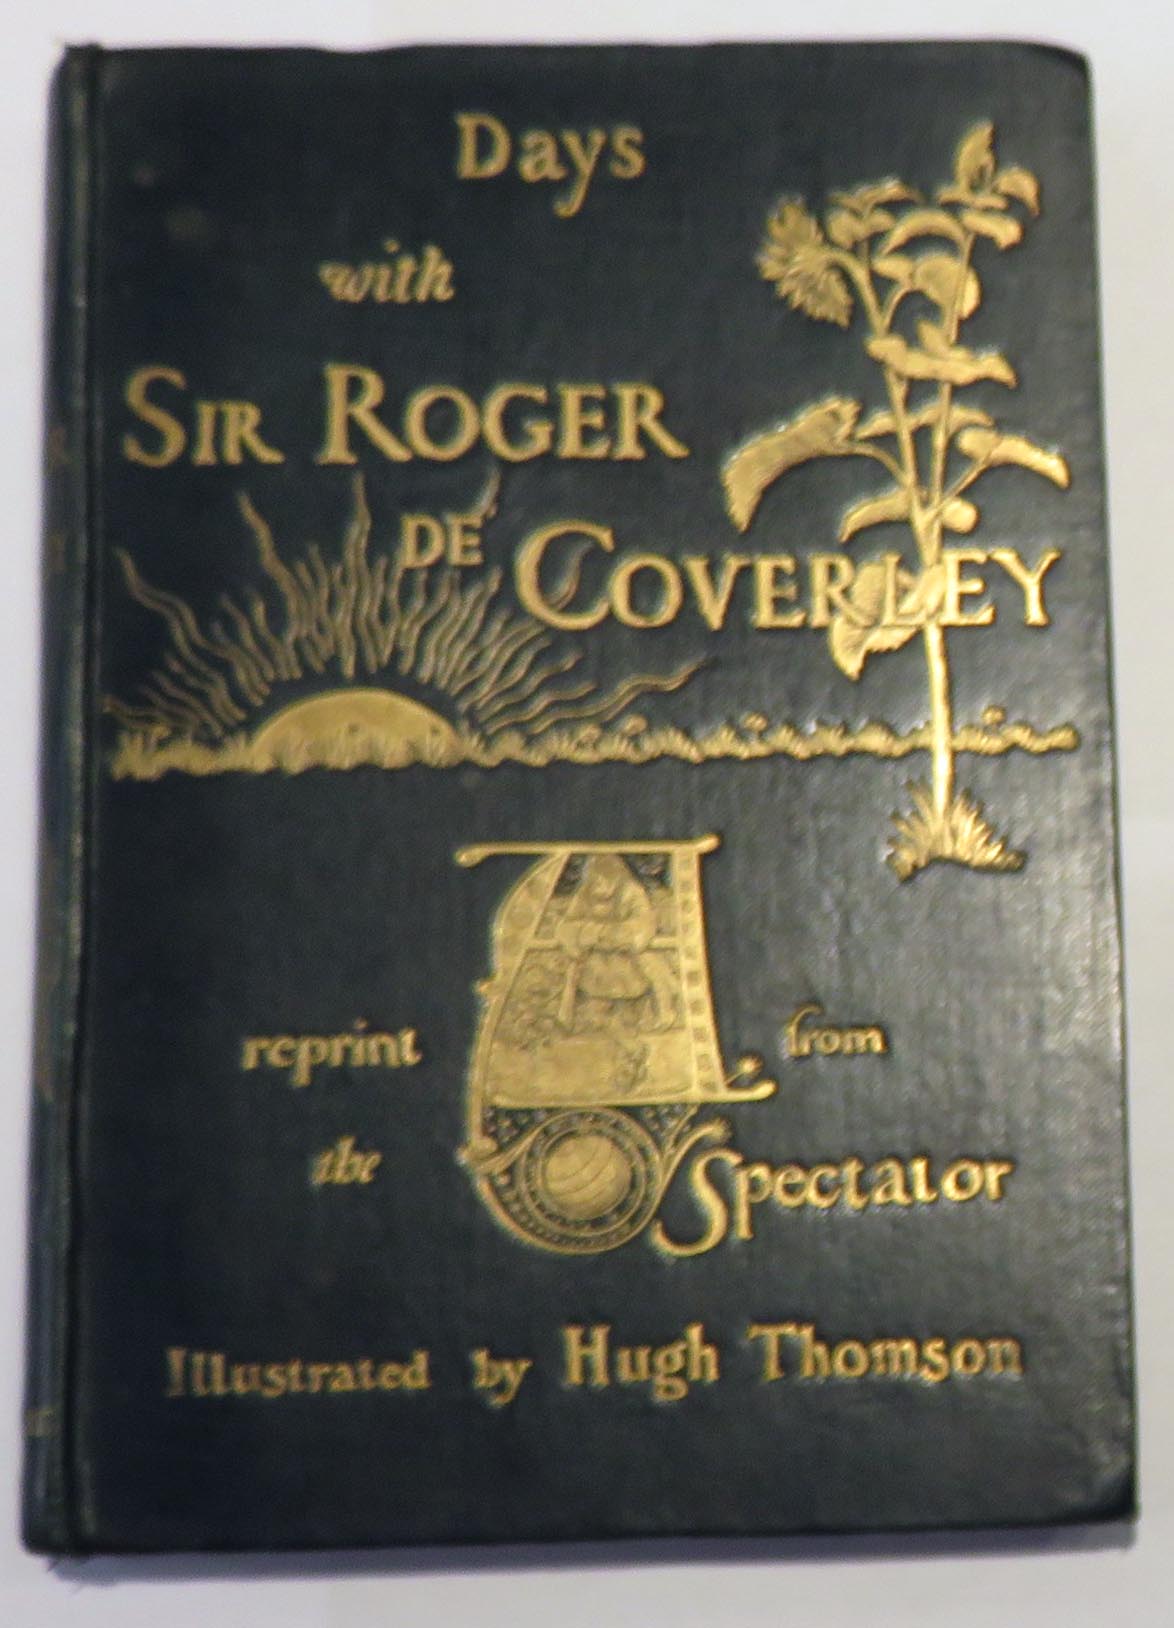 Days With Sir Roger De Coverley. Illustrated by Hugh Thomson